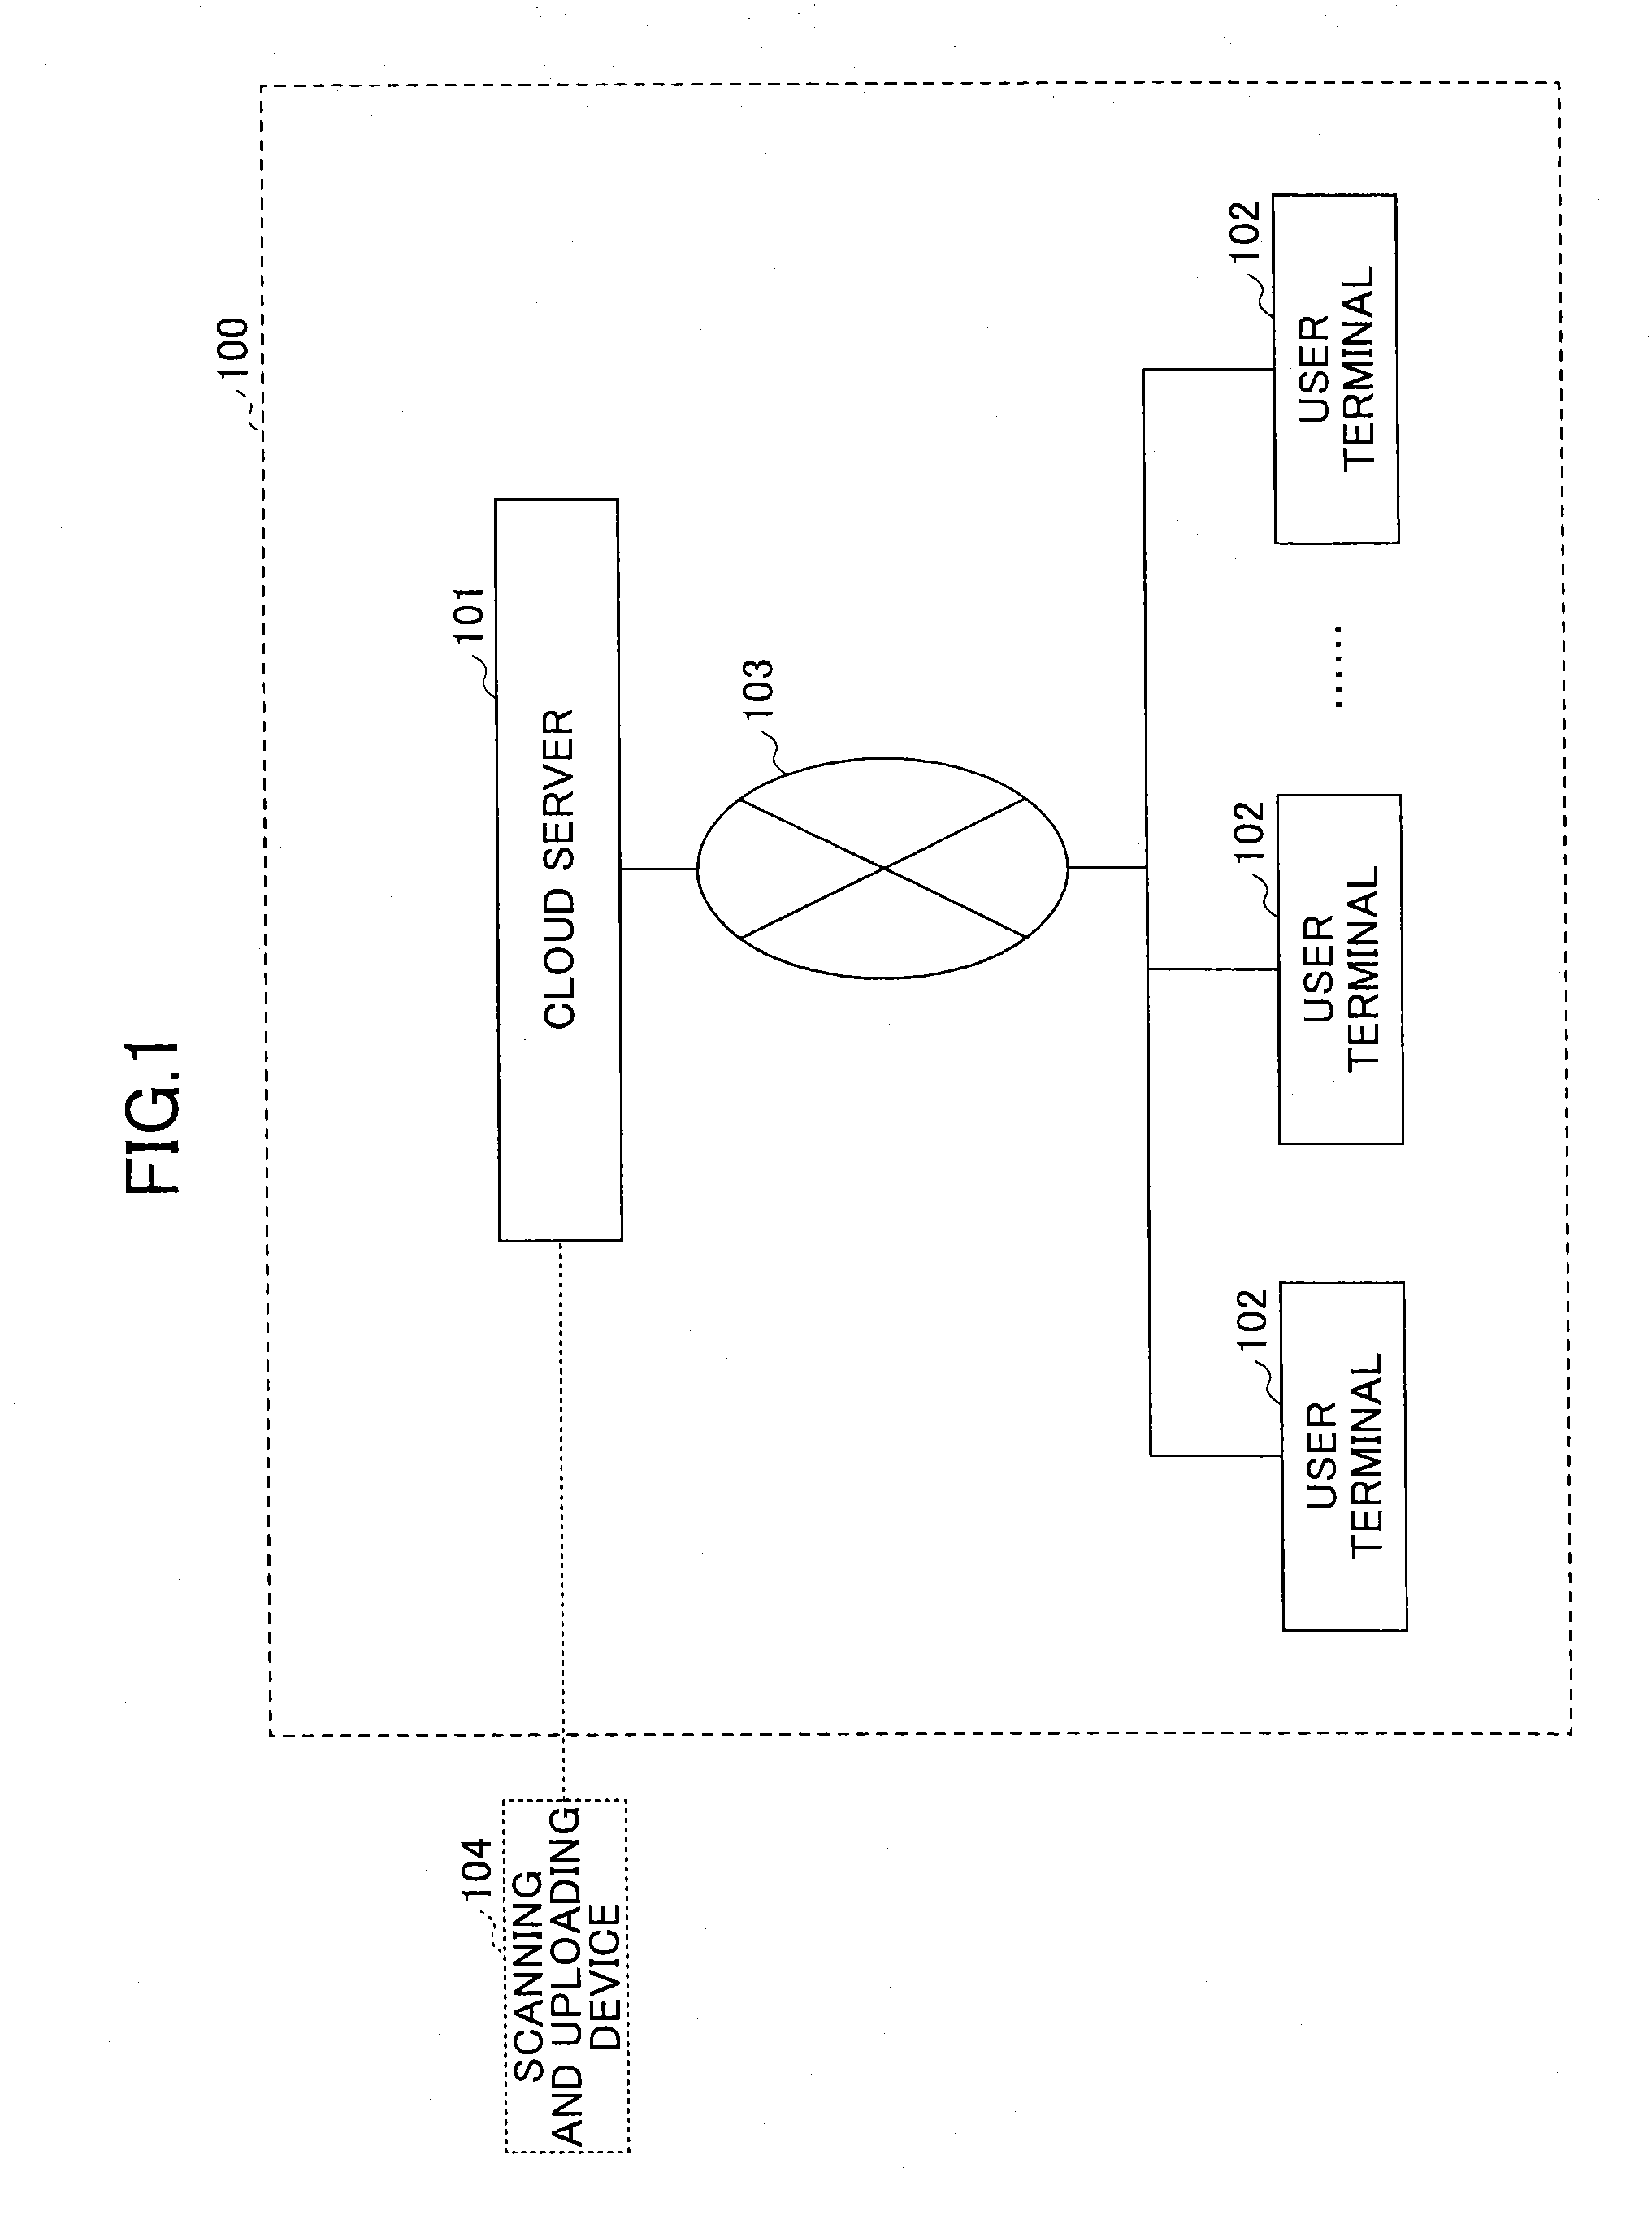 System for storing and searching image files, and cloud server